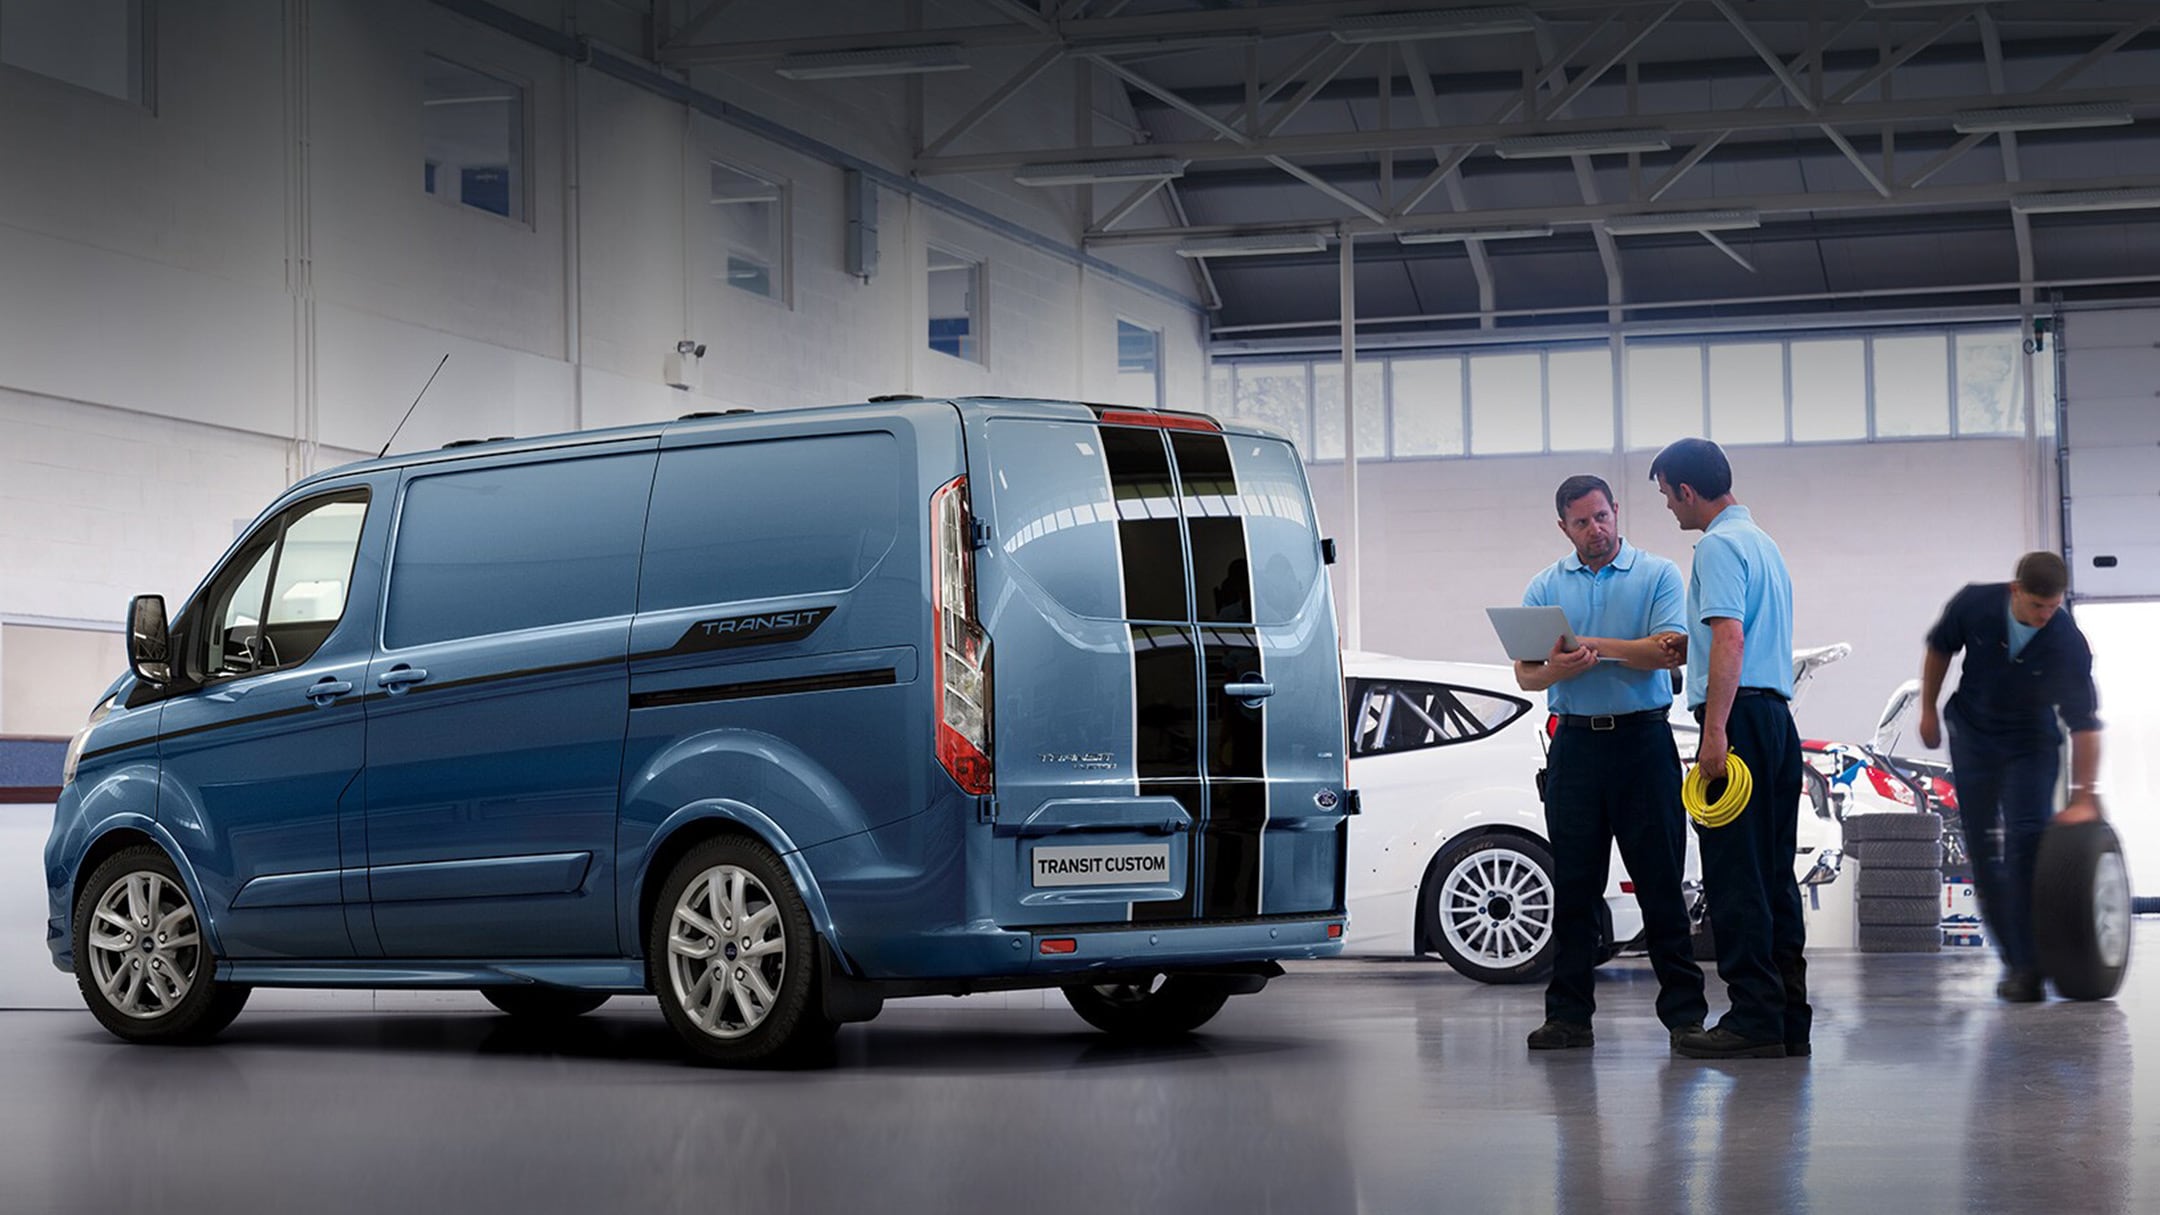 Ford Transit Custom being inspected by maintenance crew